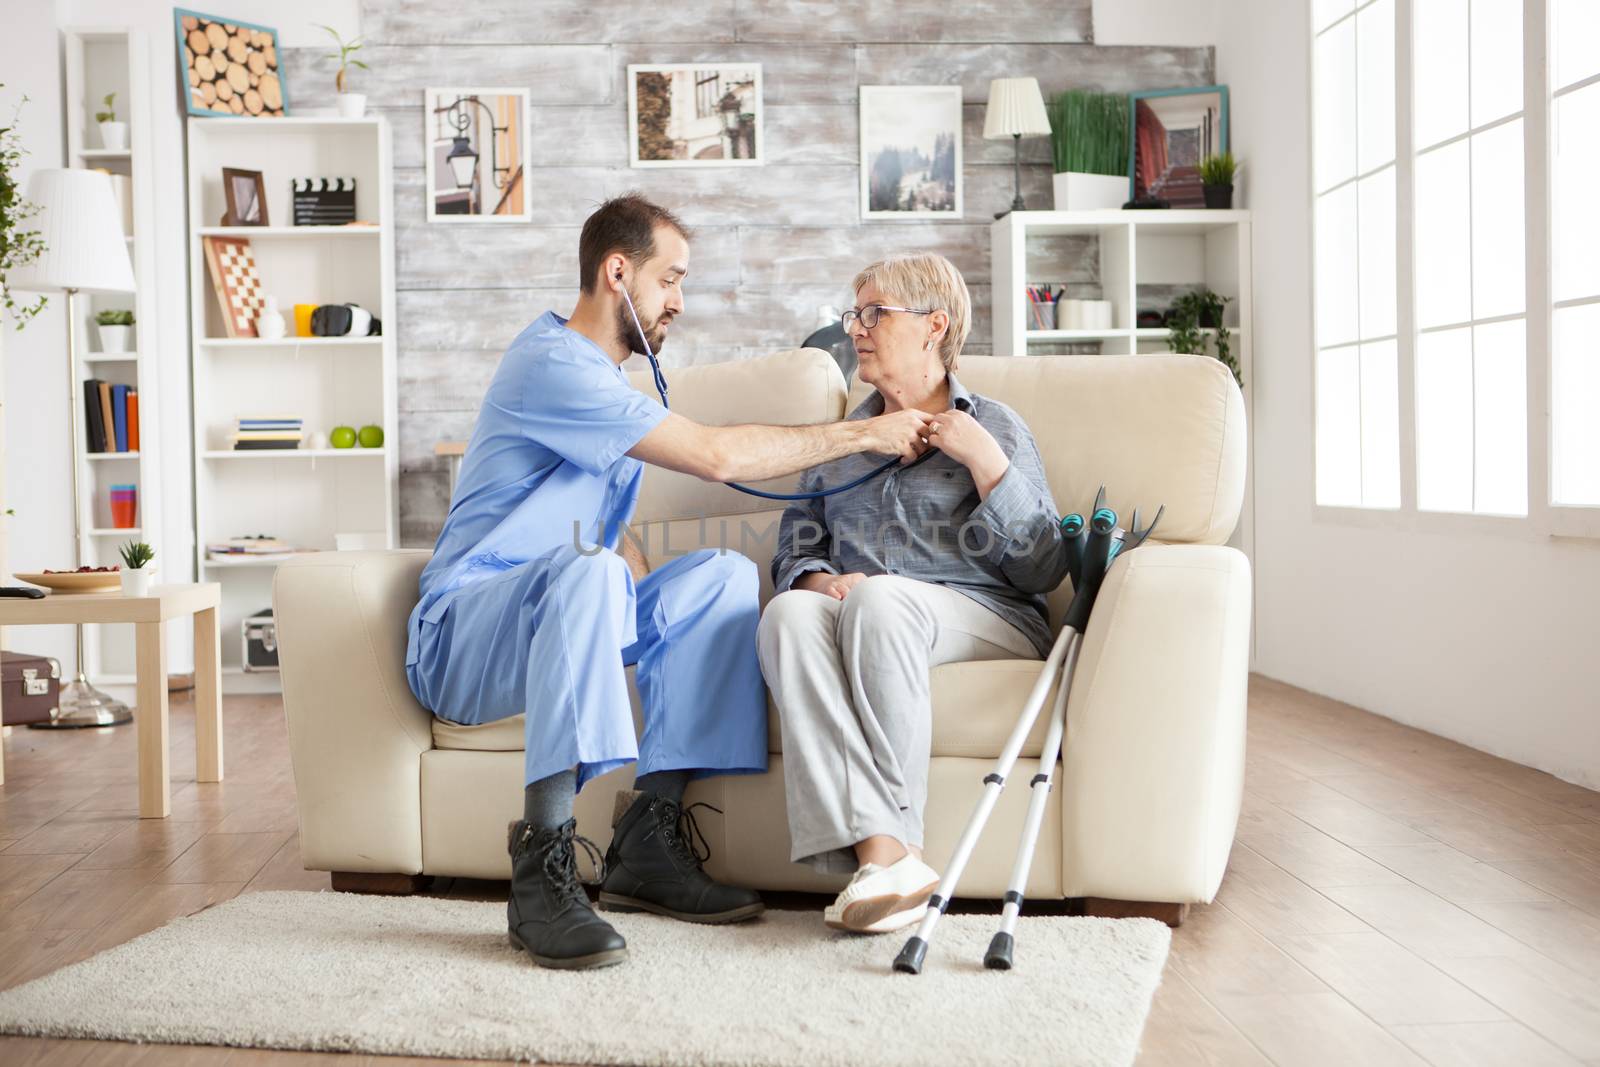 Doctor with stethoscope in a nursing home checking old woman heart beat sitting on couch. Old woman with crutches.